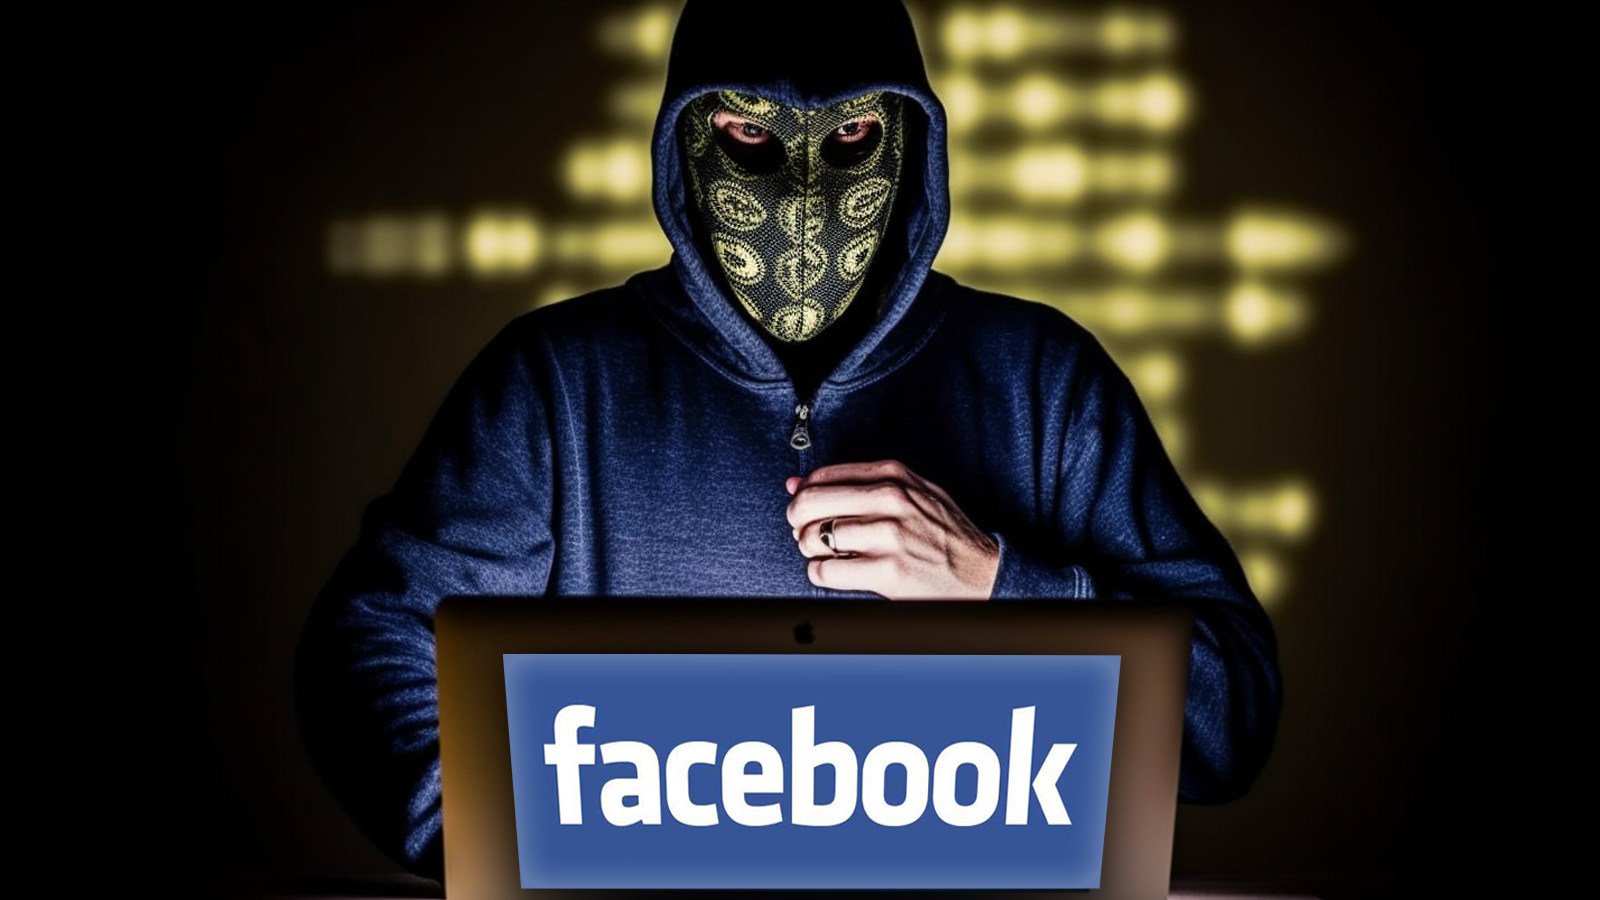 New Facebook Scam Alert: Hacked Verified Pages Posing as Meta Ads and Google Bard AI